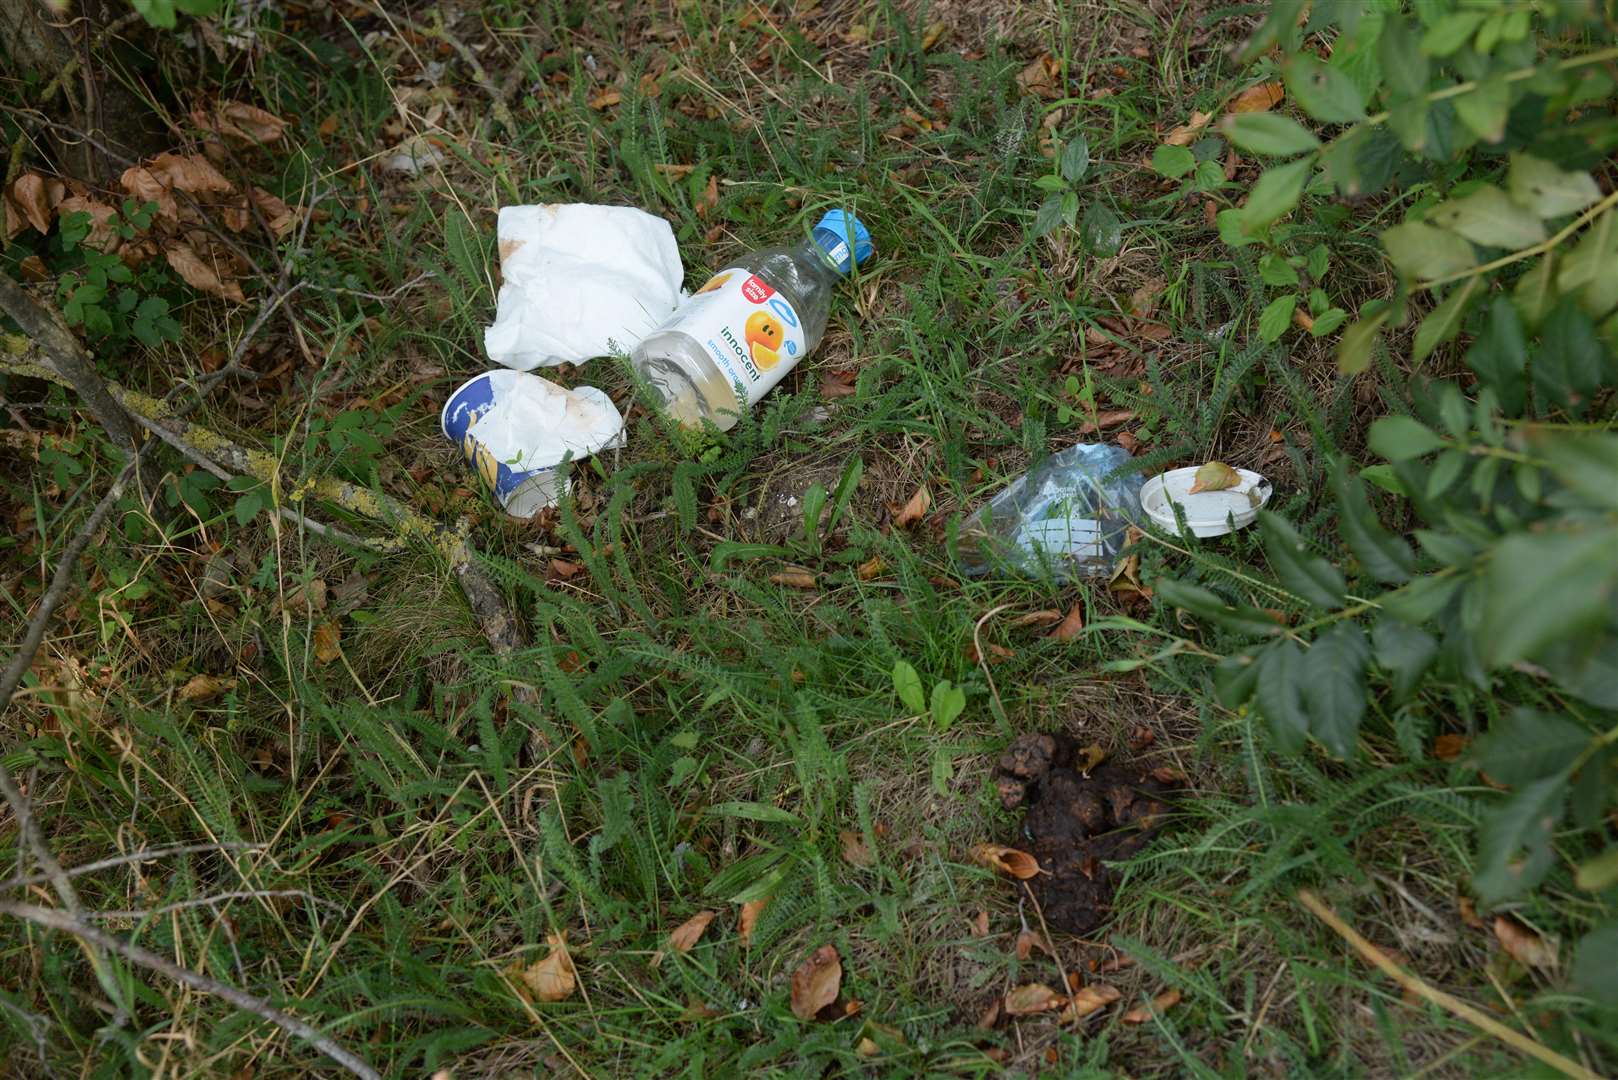 Litter and excrement in the verges and layby